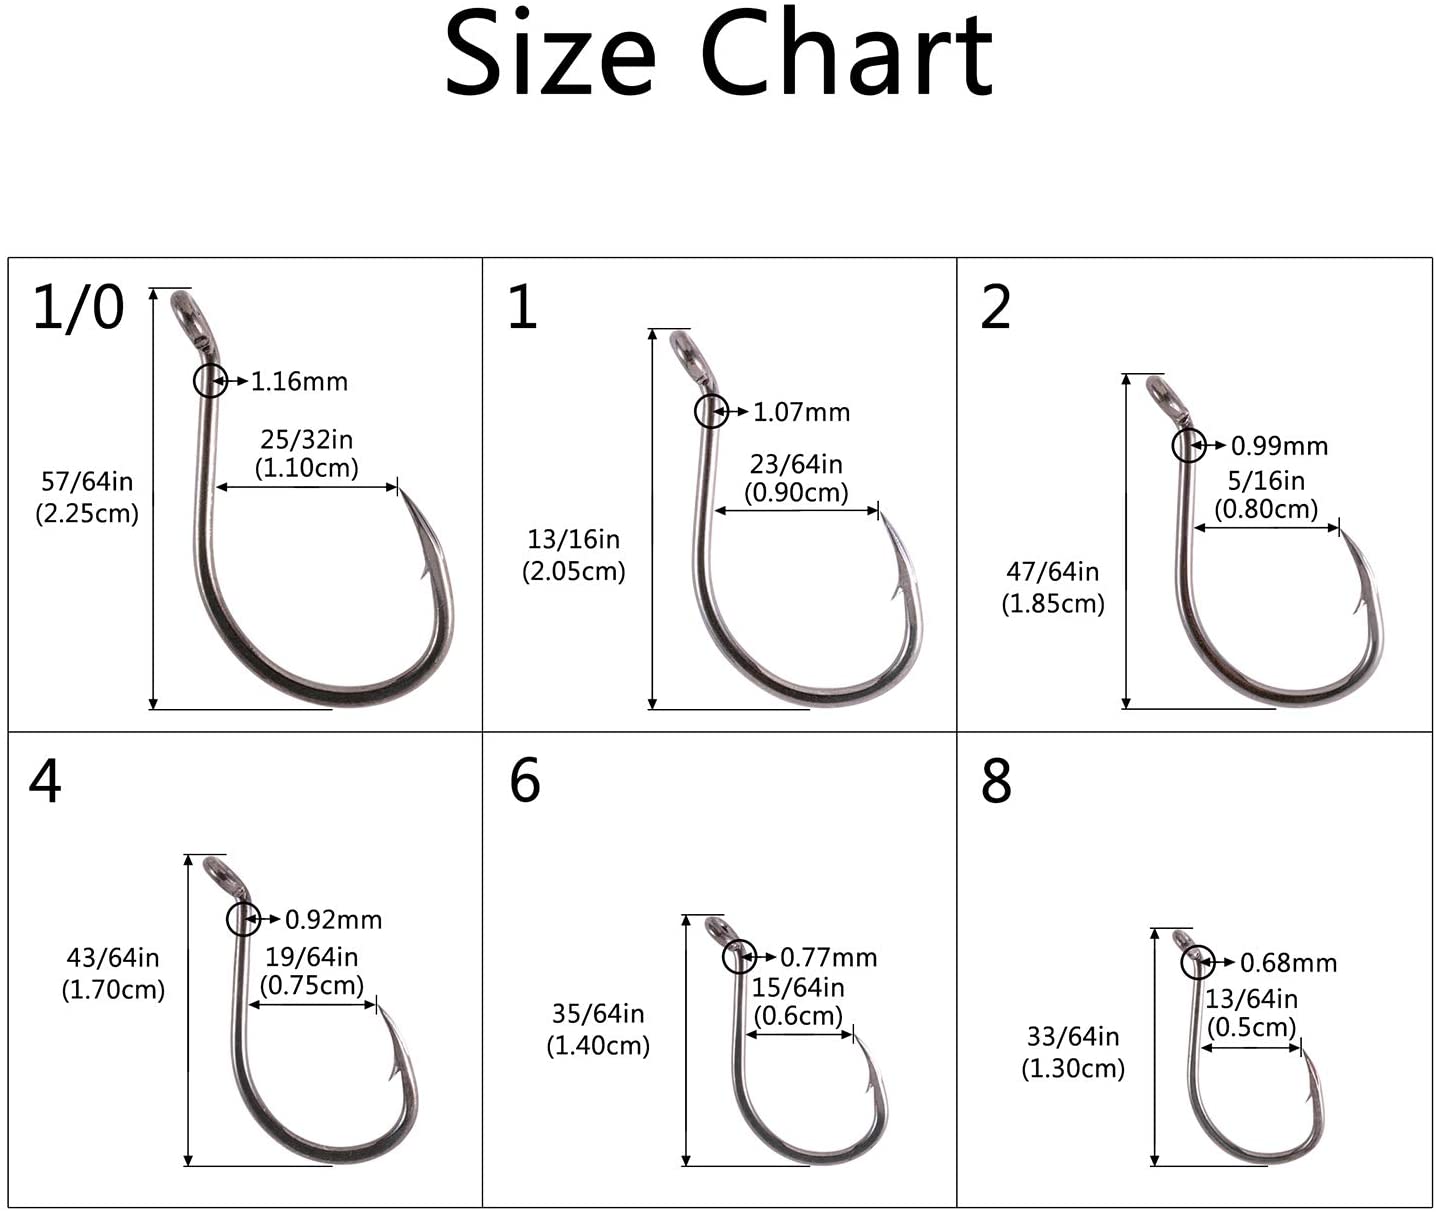 175/180 Pcs Octopus Offset Fishing Hooks in Assorted Sizes with Tackle